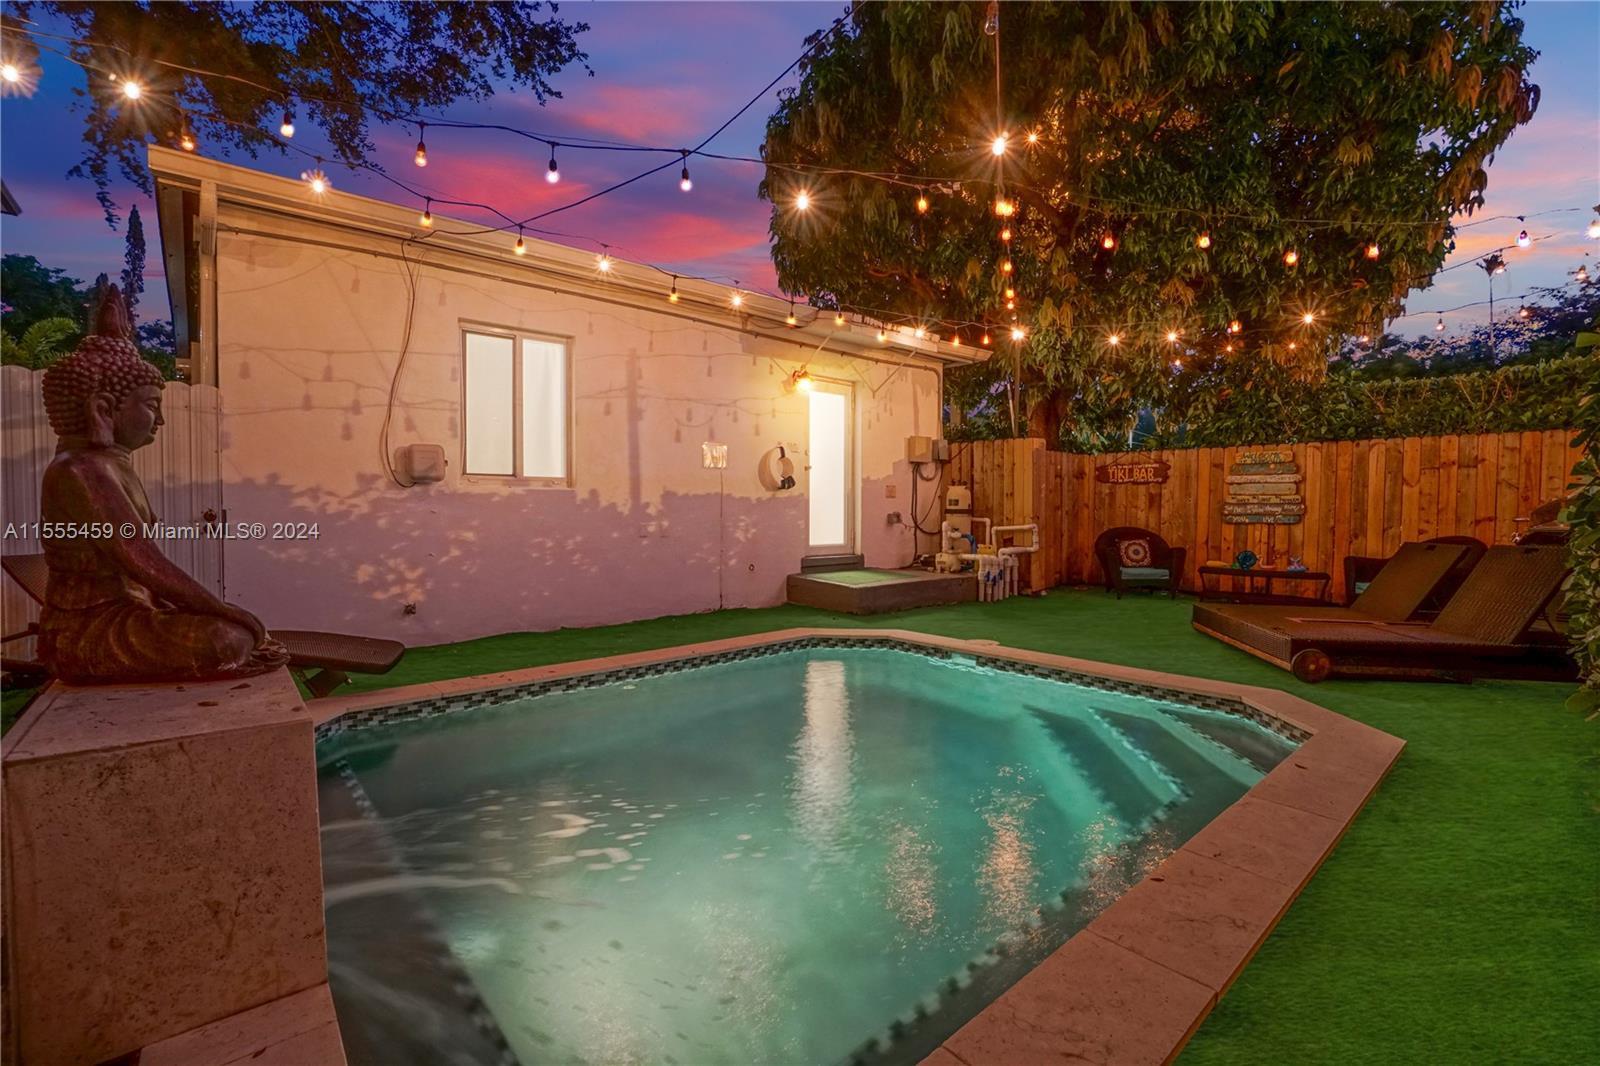 Bohemian Bungalow with a Pool:
7 NE 50 ST: Enjoy the Florida sunshine poolside at this income-produ